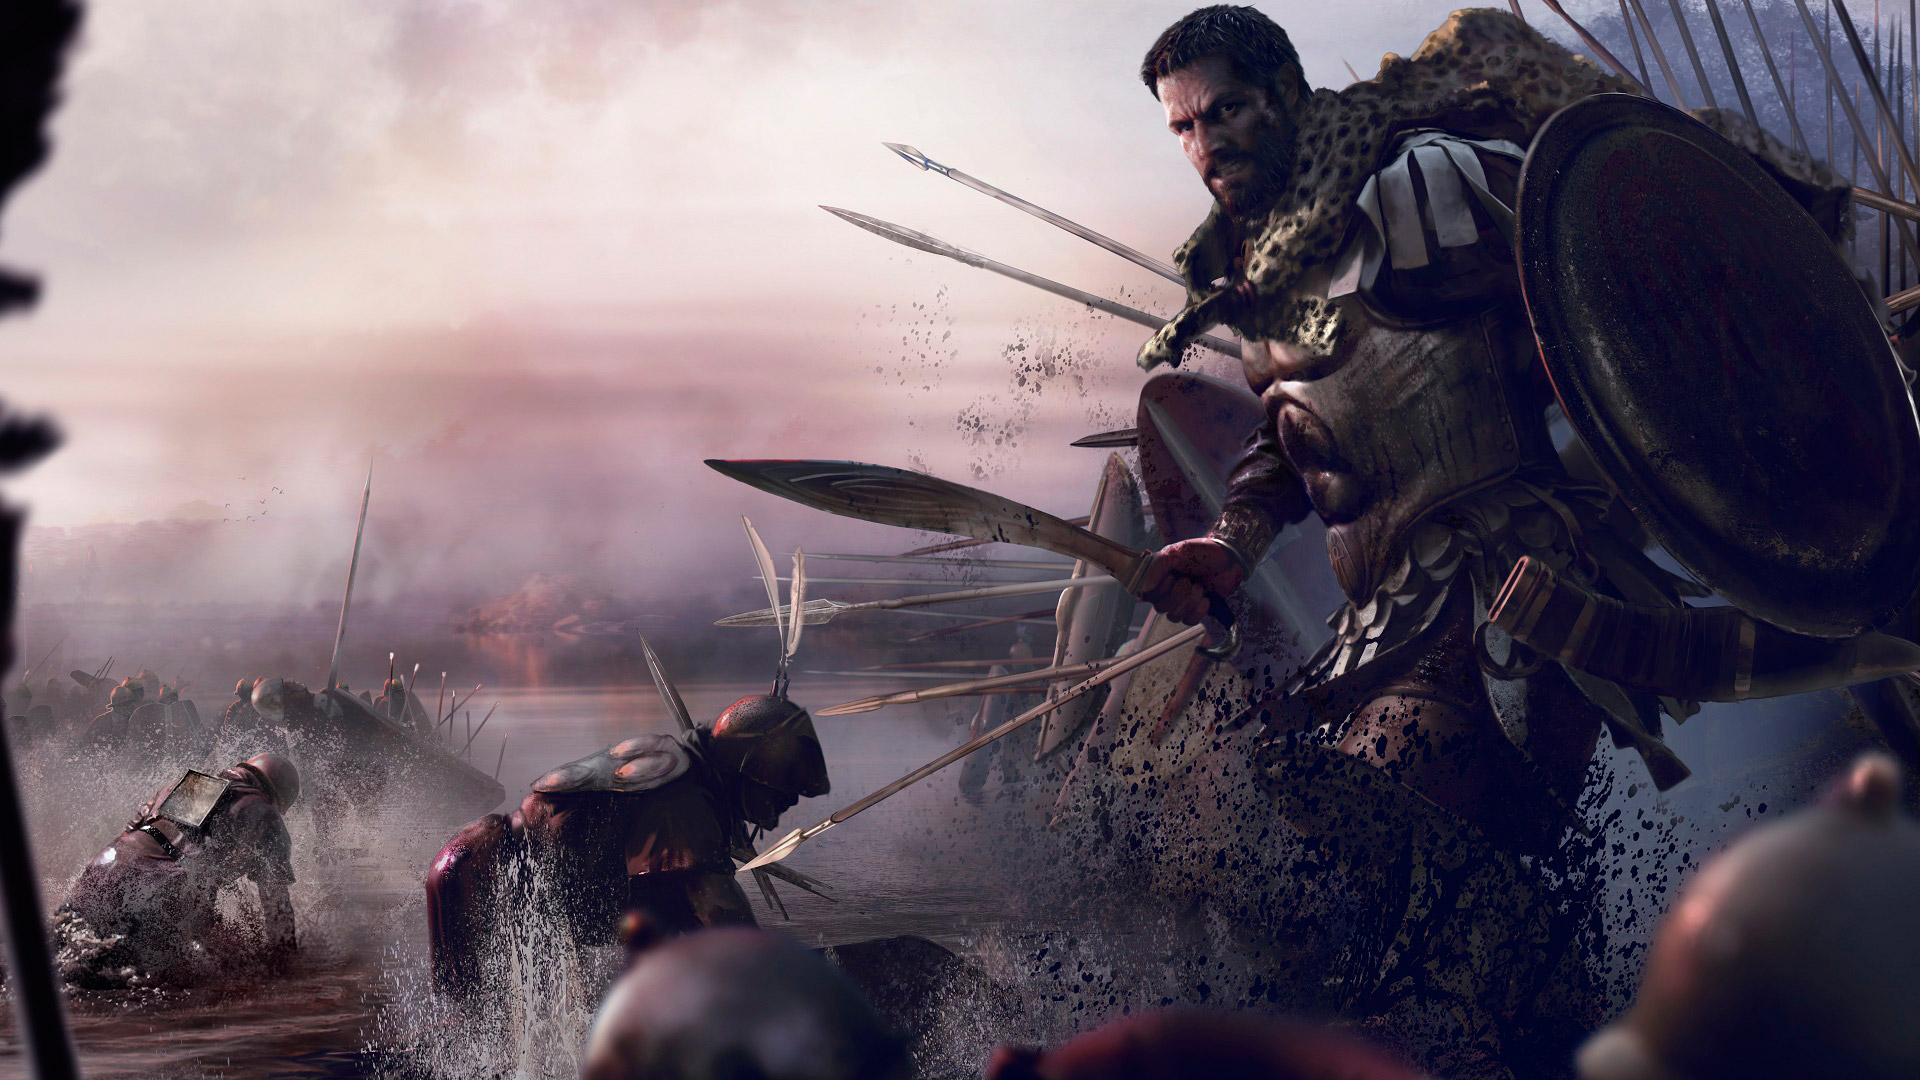  wallpapers of Total War Rome 2 You are downloading Total War Rome 2